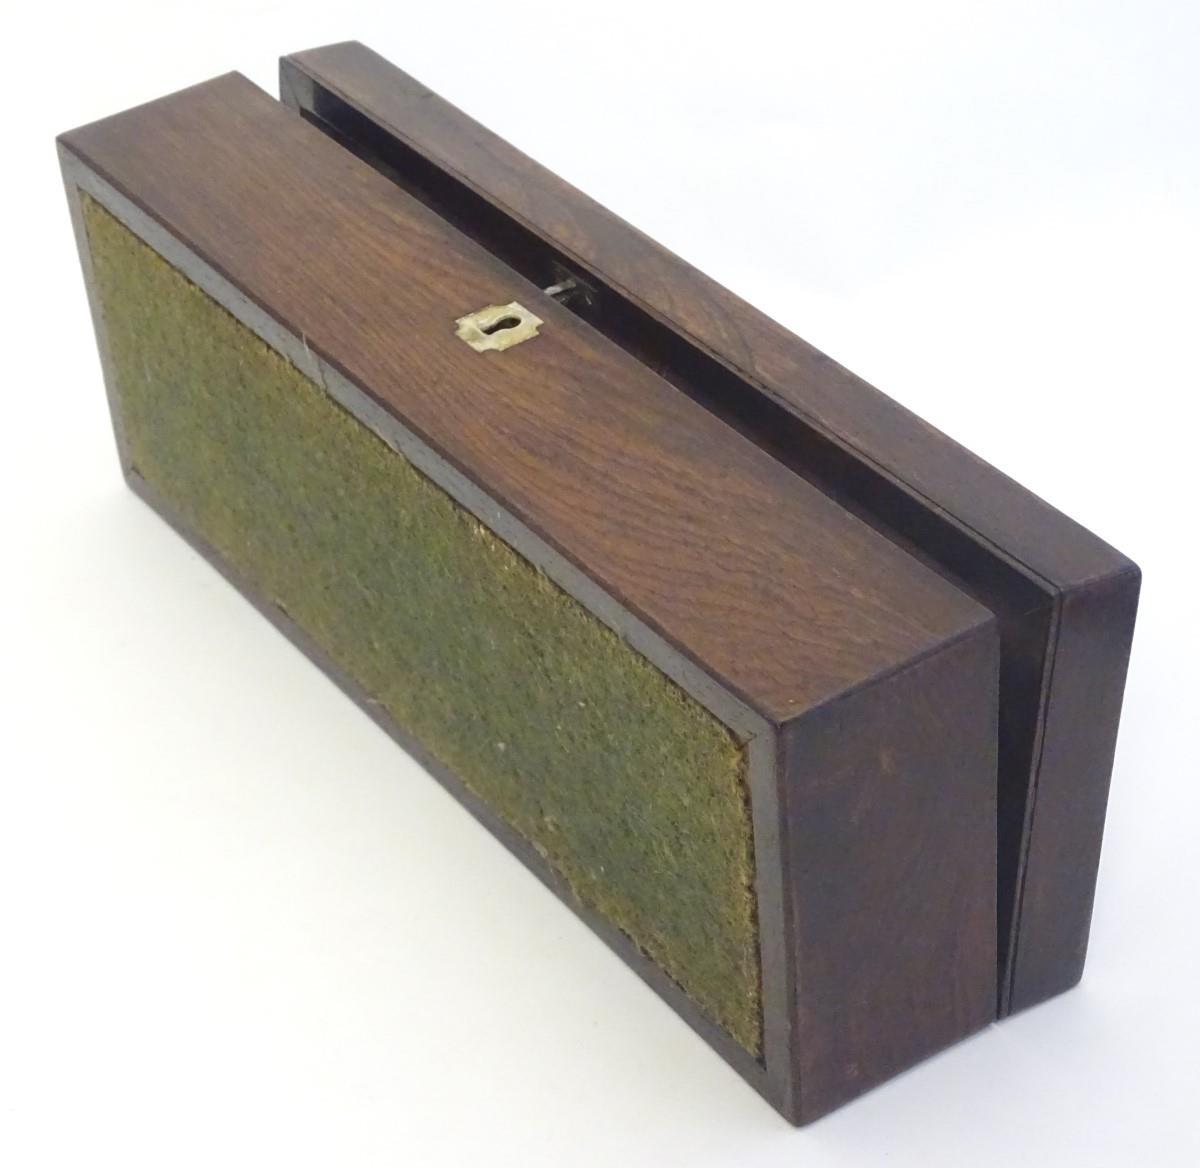 A 19thC mahogany glove box of rectangular form with inlaid mother of pearl detail. Approx. 3" x 11 - Image 2 of 6